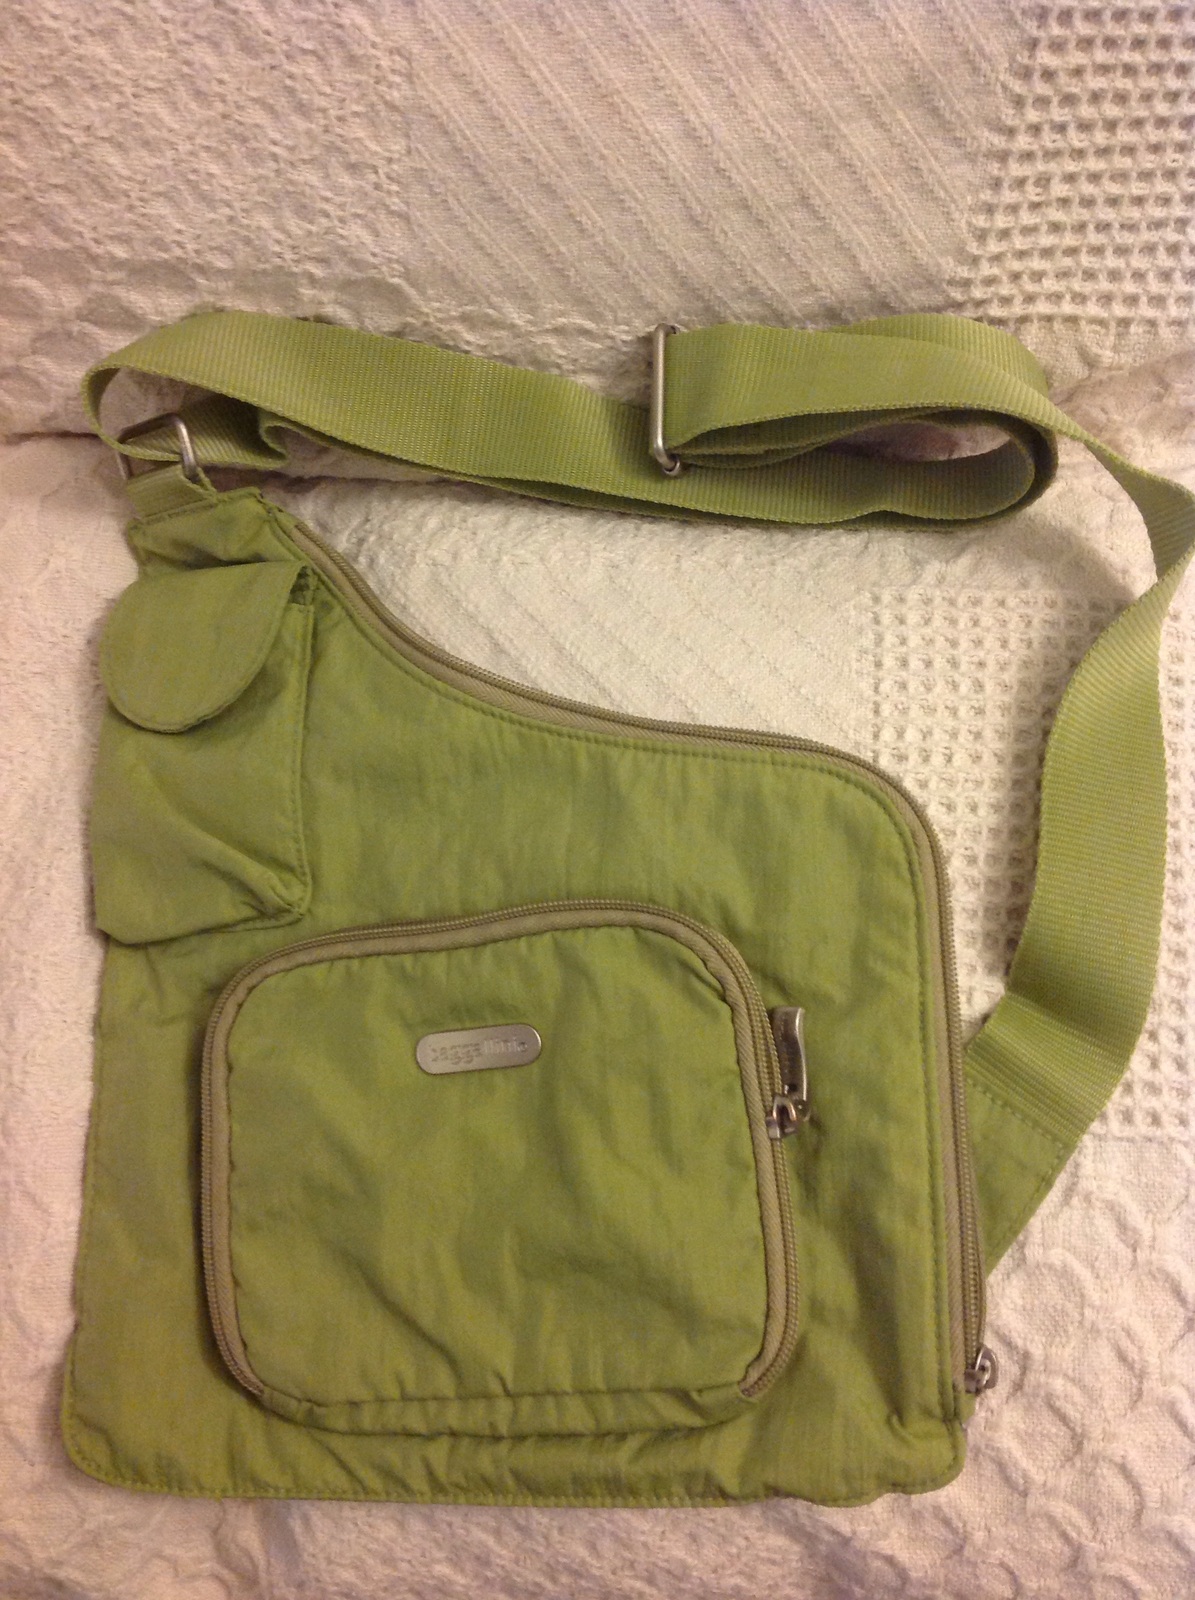 Baggallini Lightweight Cross Body Travel Bag Green - Mixed Items & Lots